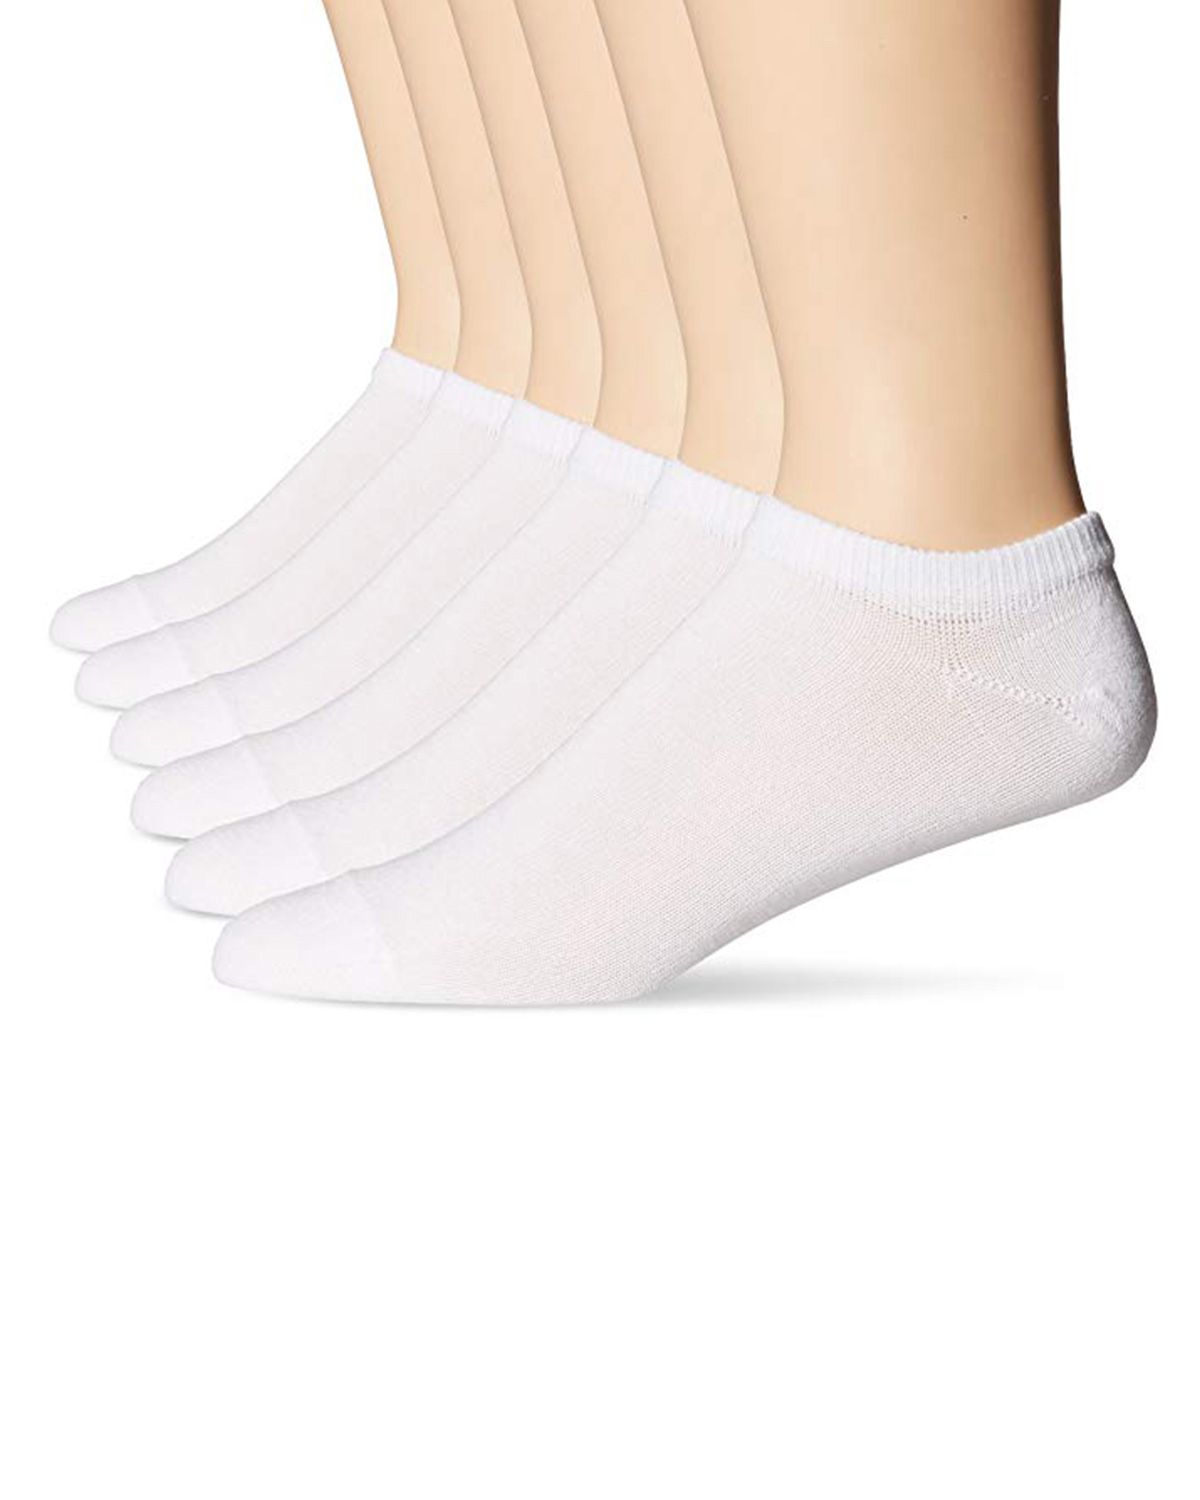 Hanes 913/6 Mens ComfortBlend Liner Socks 6-Pack - Free Shipping Available